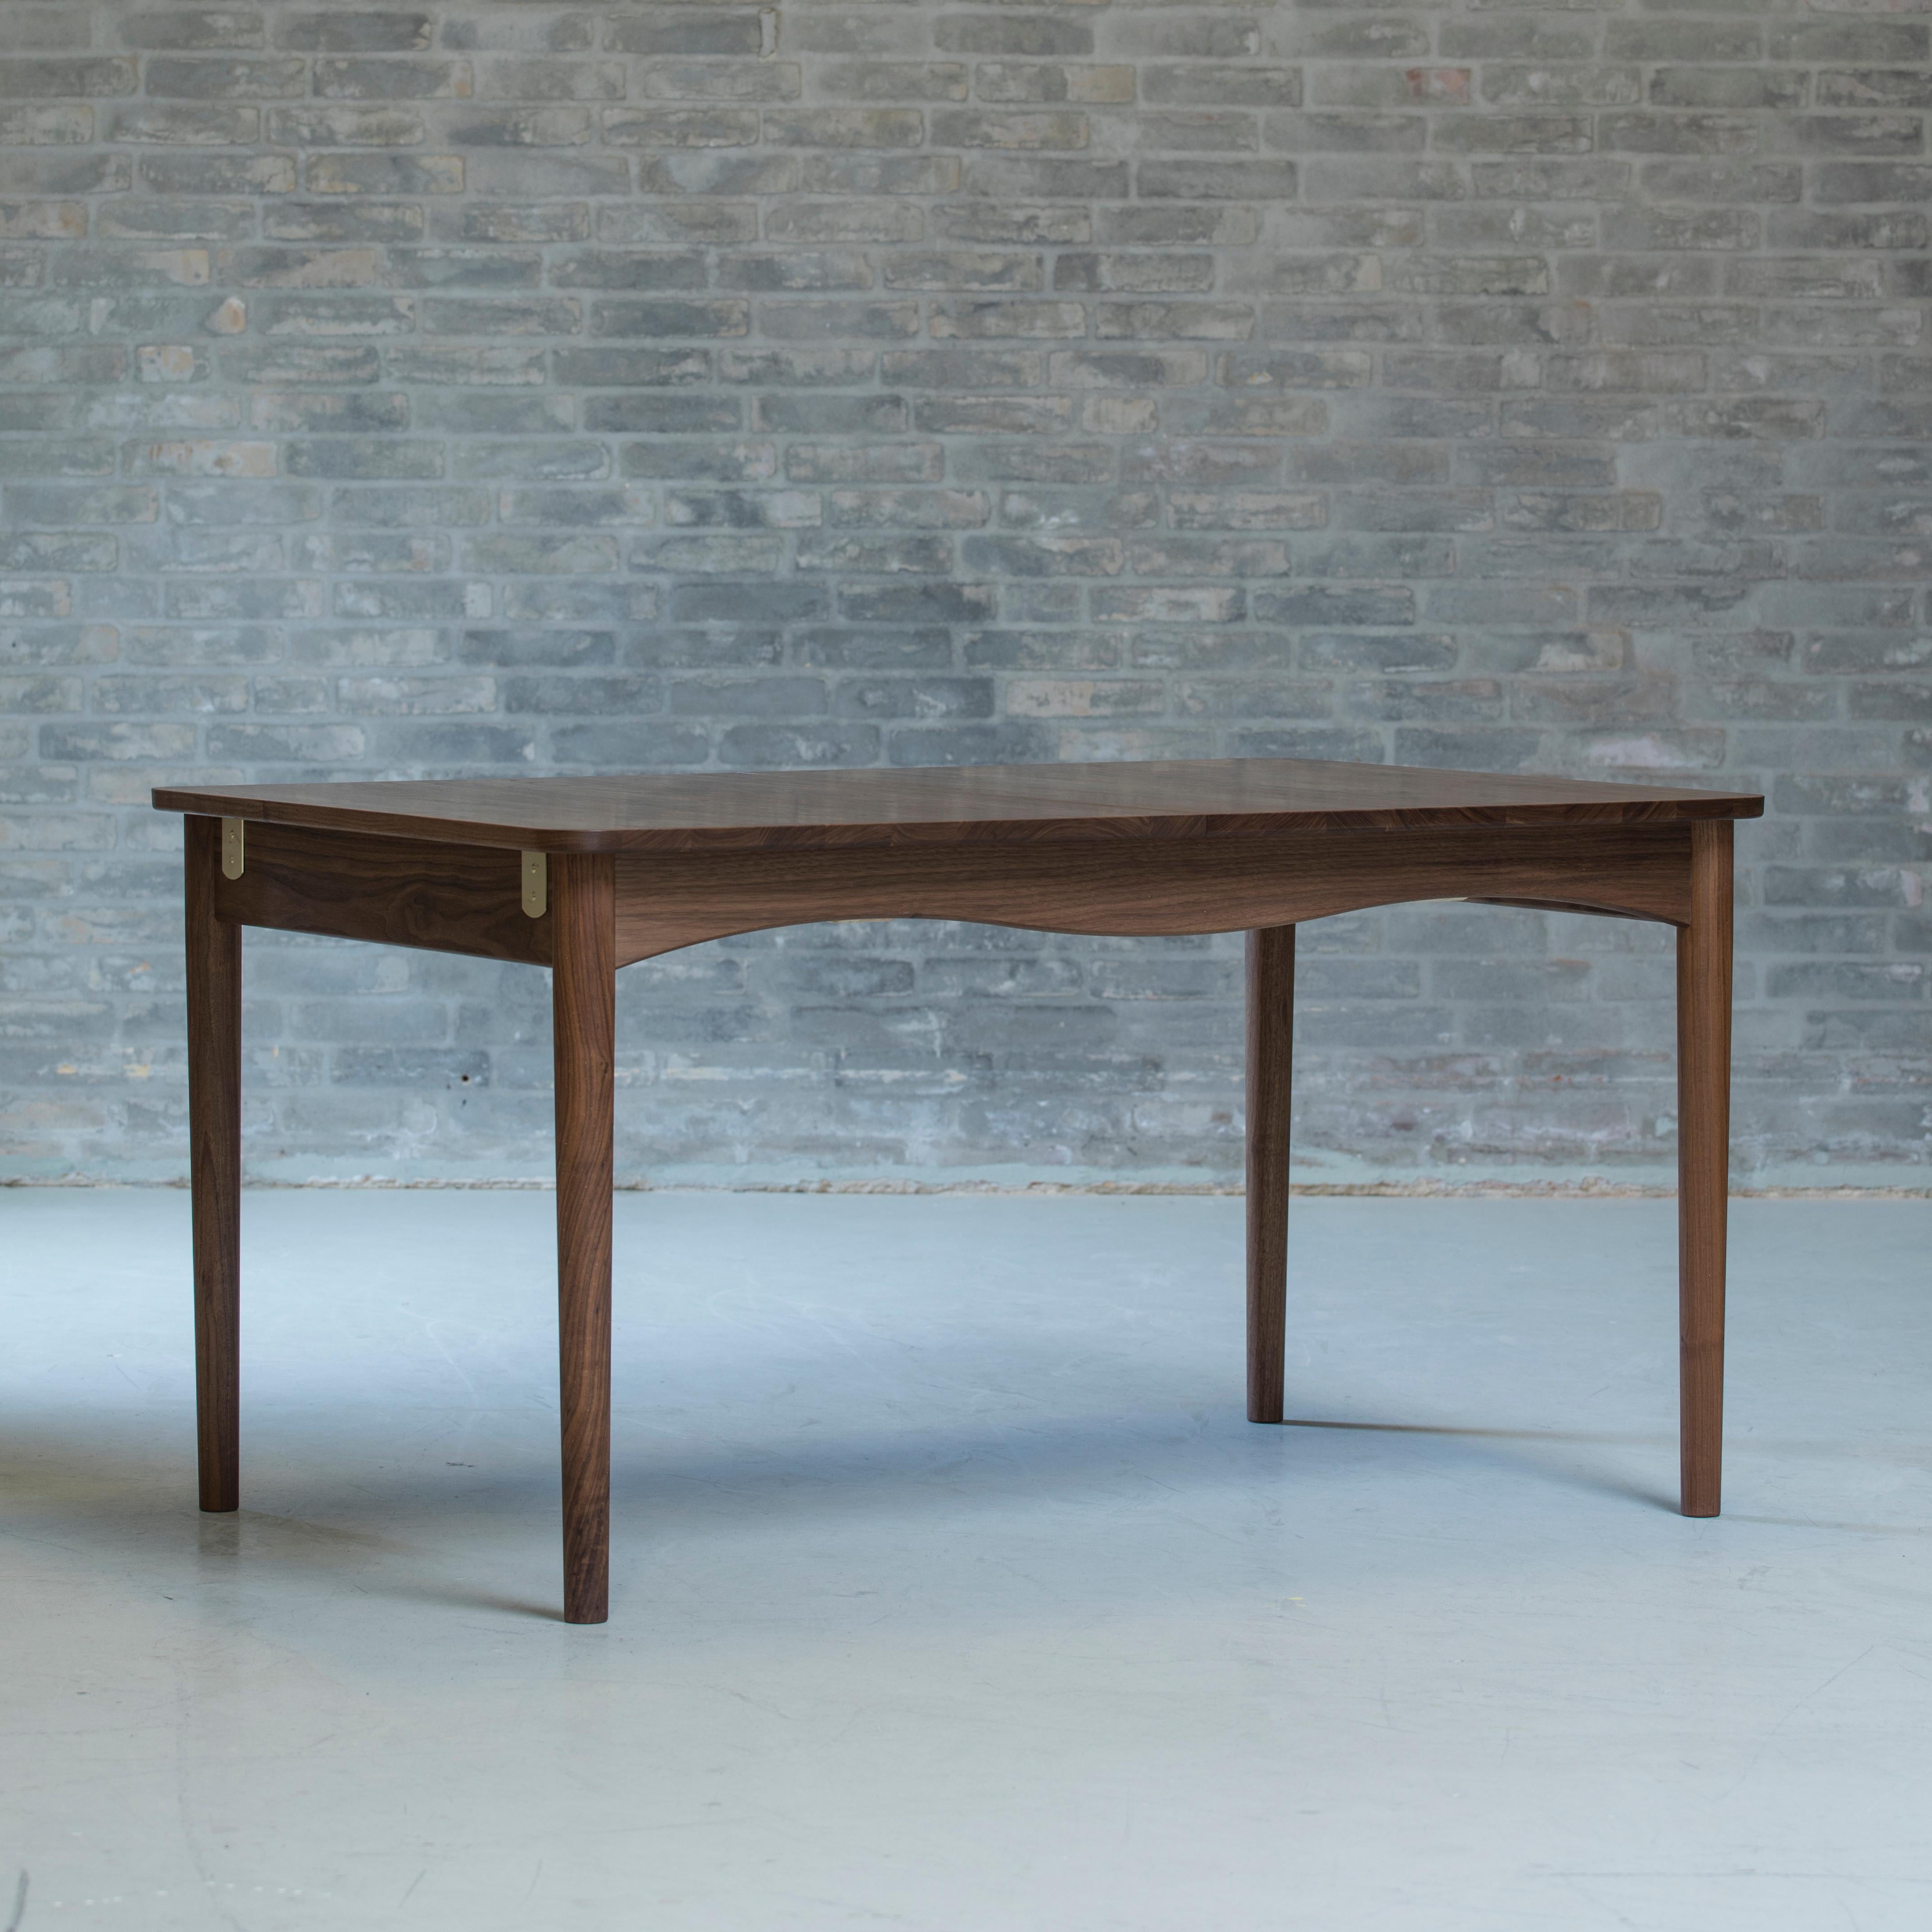 Contemporary Finn Juhl Borvirke Table Wood with Extensions Leaves